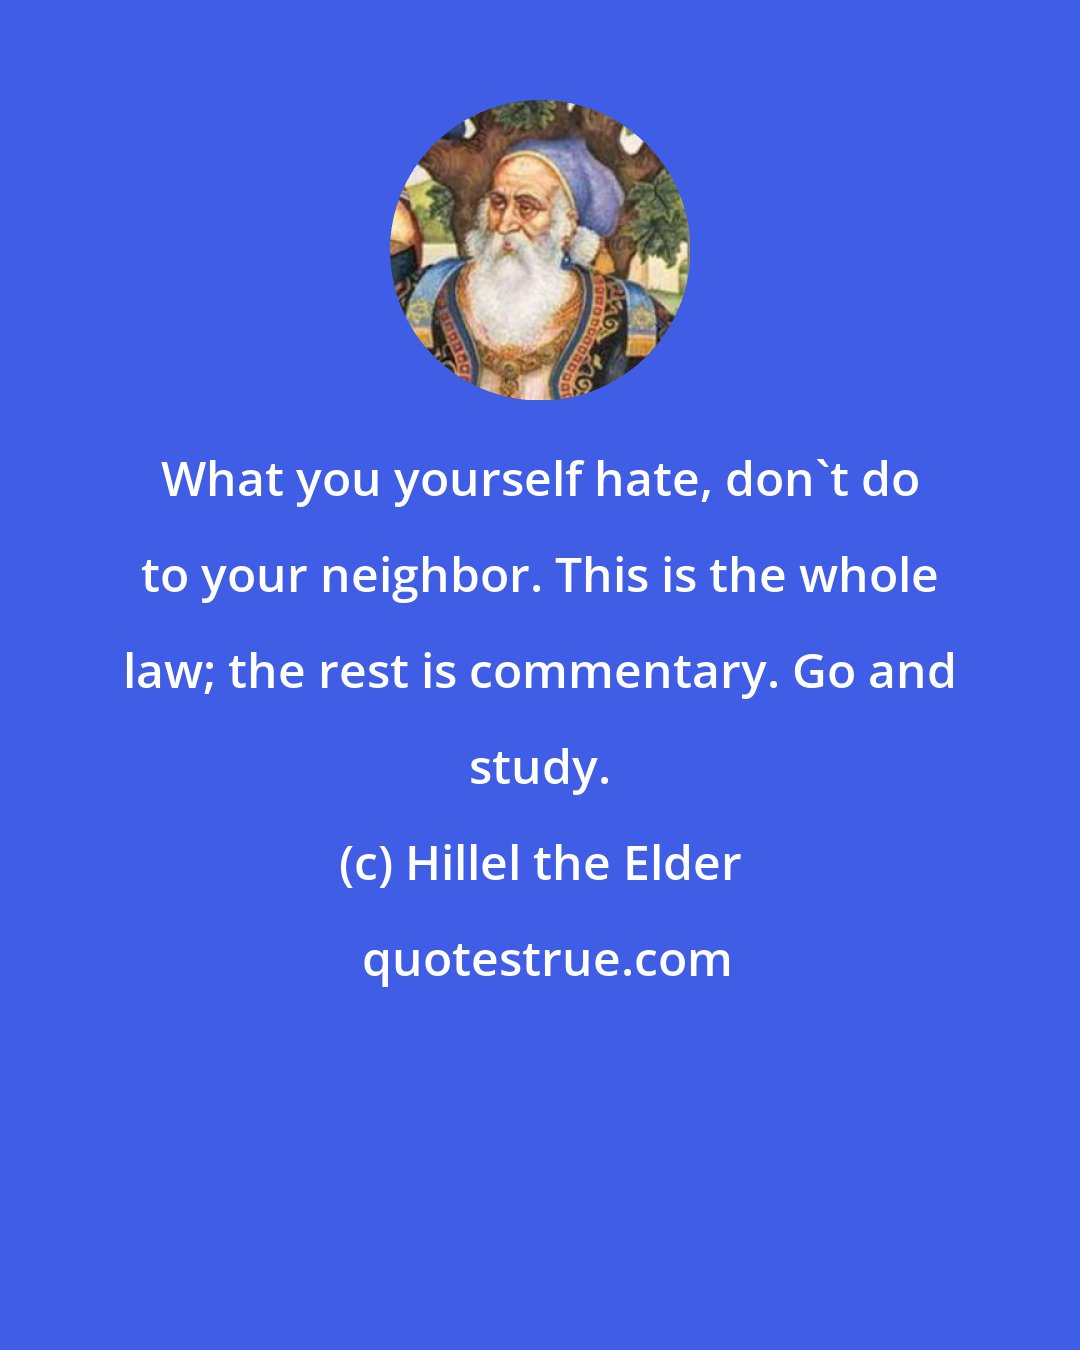 Hillel the Elder: What you yourself hate, don't do to your neighbor. This is the whole law; the rest is commentary. Go and study.